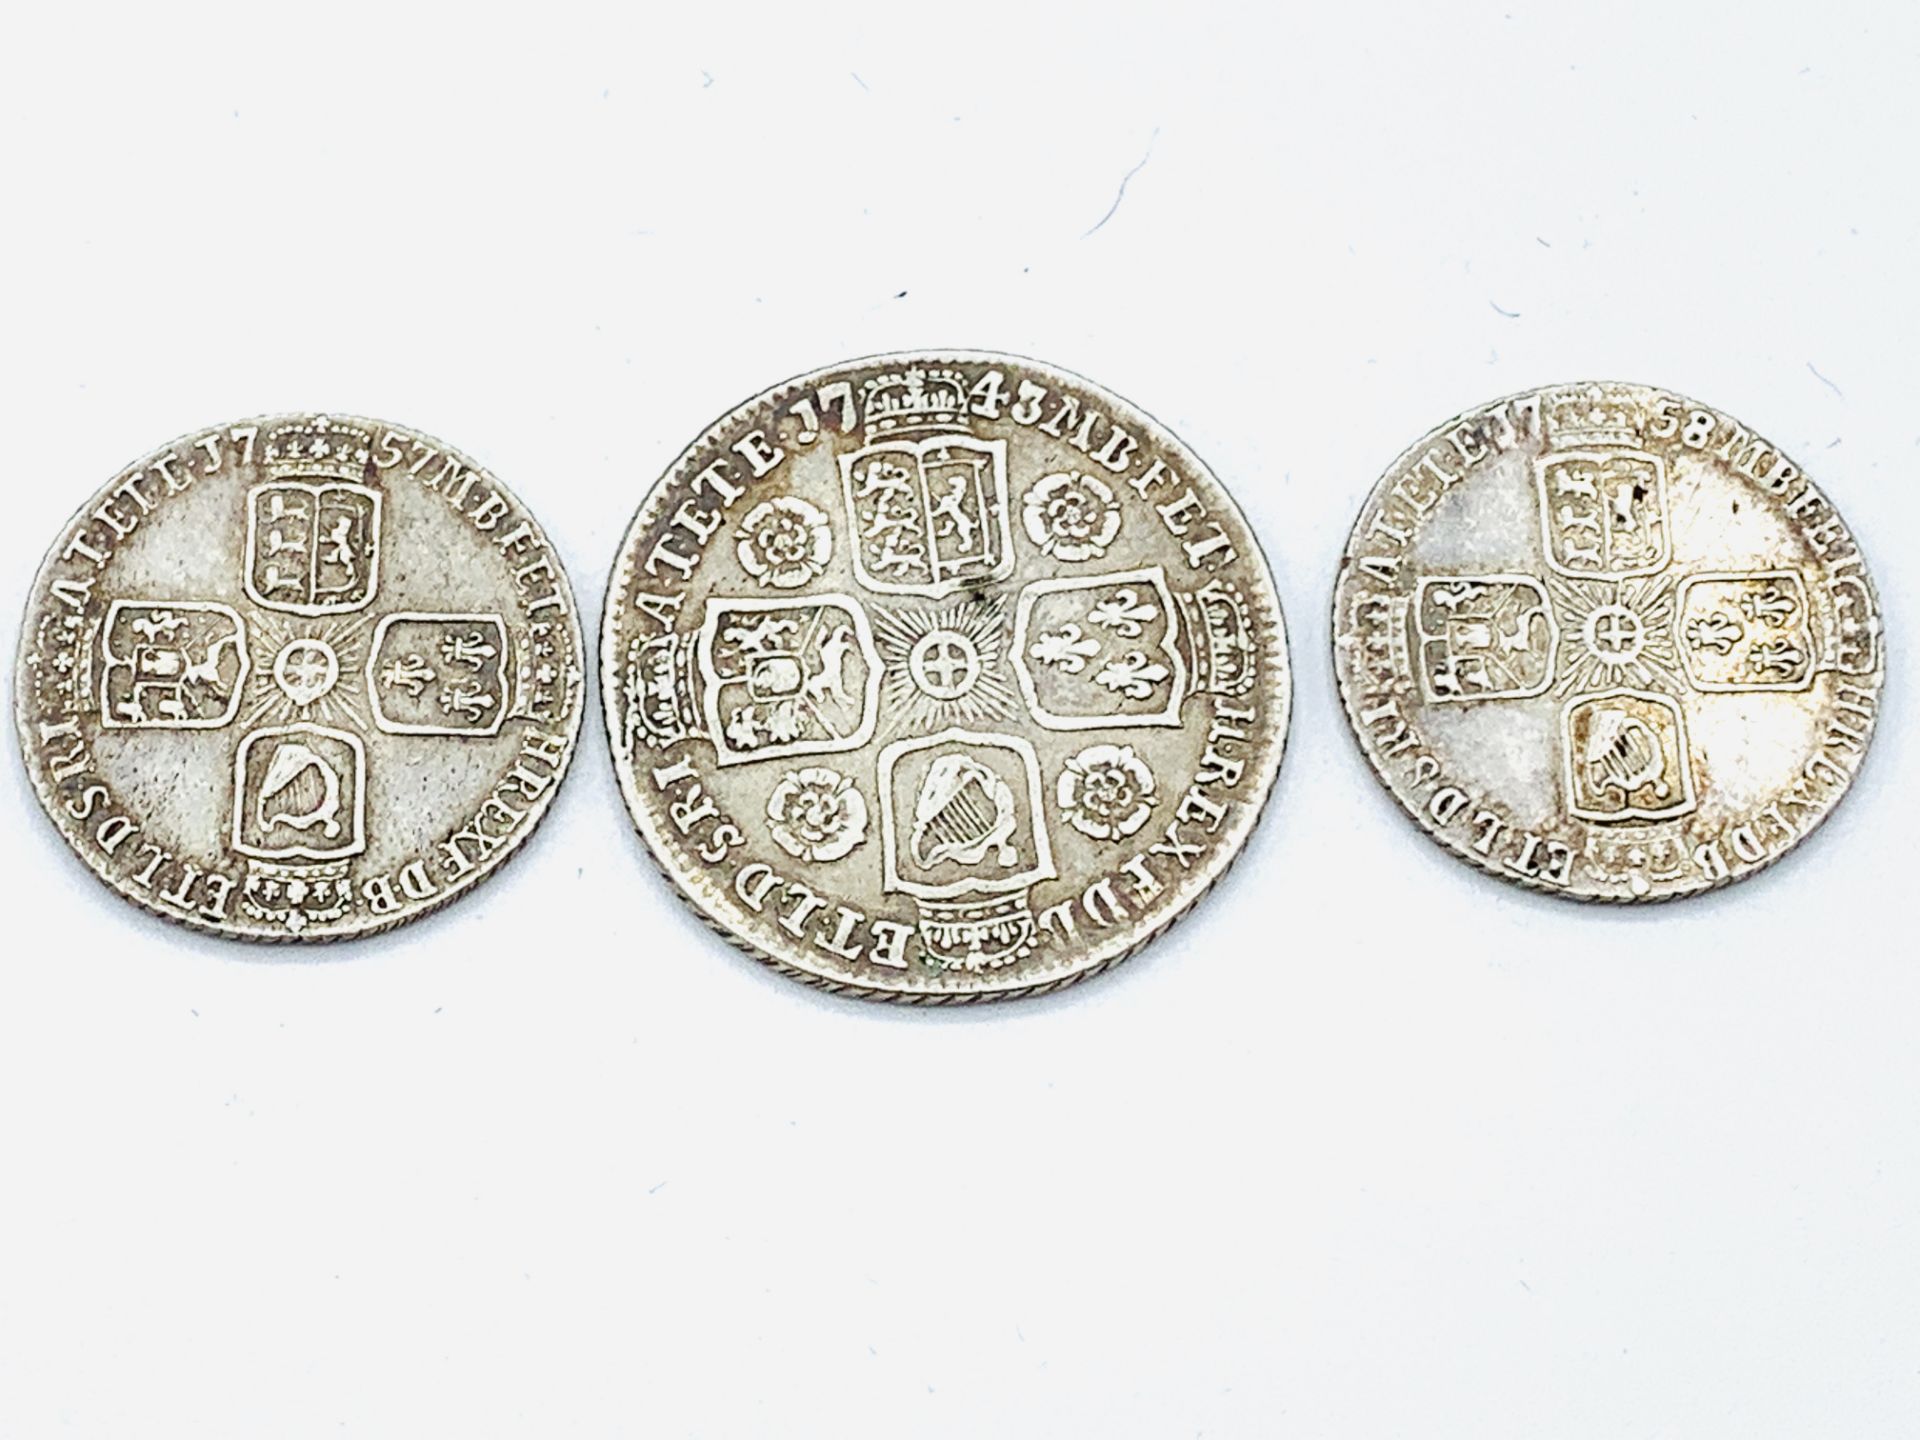 George II Silver Shilling 1743; George II SIlver Shilling 1758 and a George II Sixpence 1757 - Image 2 of 2